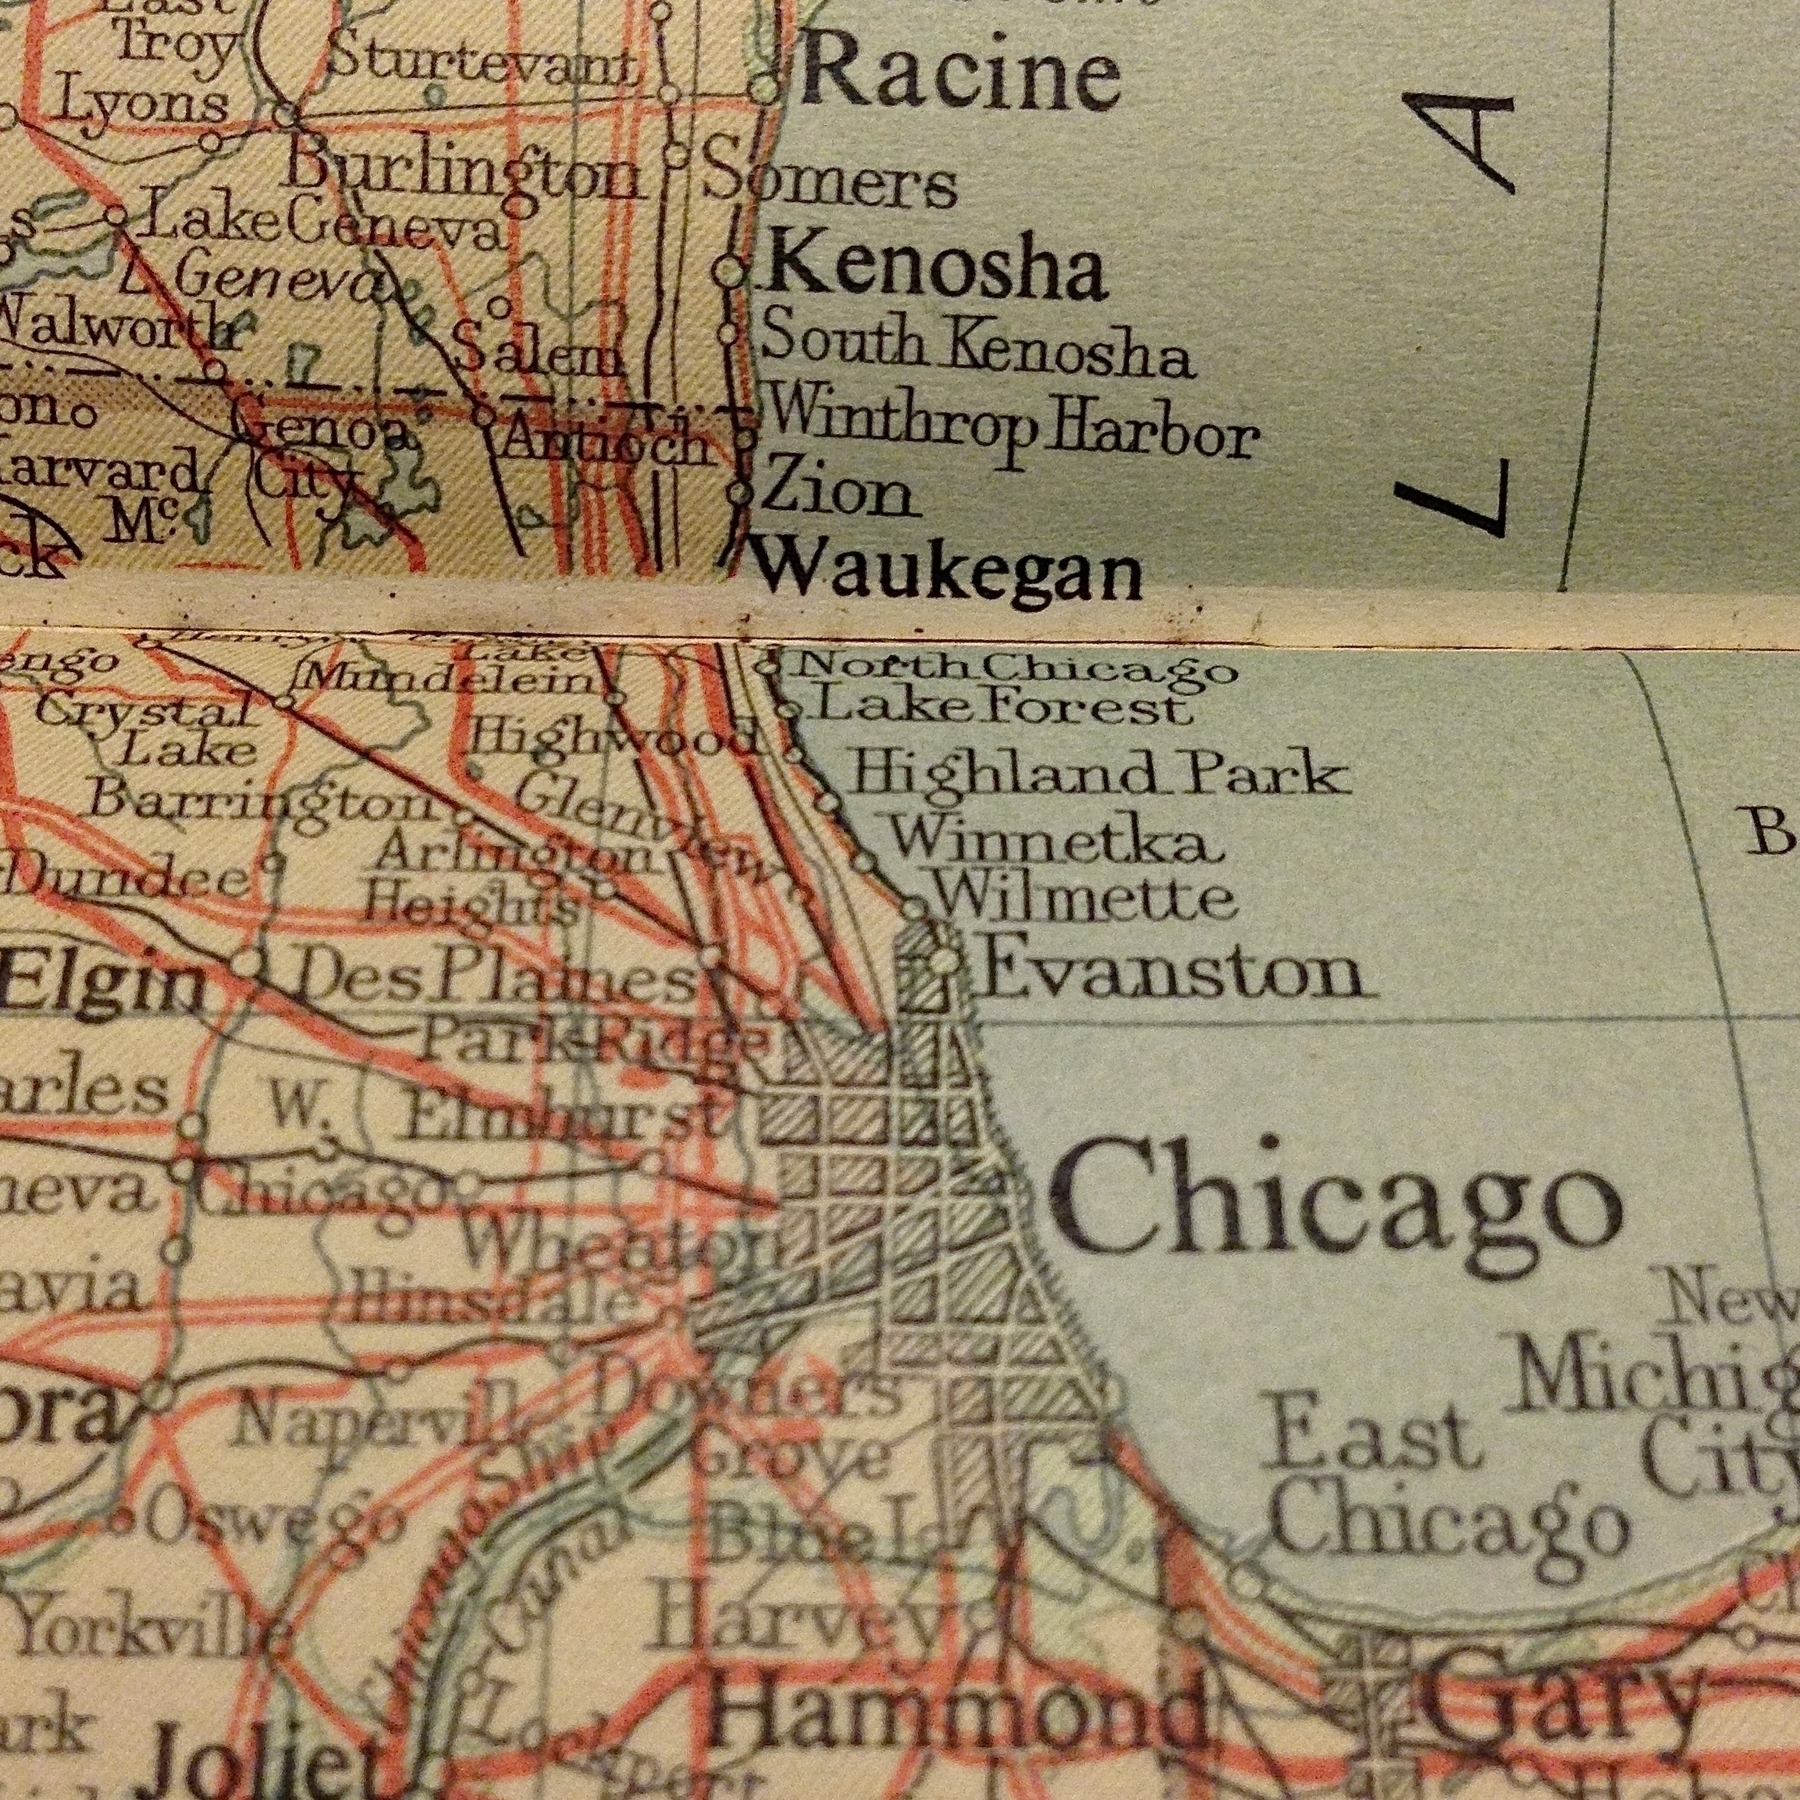 A vintage paper map showing the greater Chicagoland area.